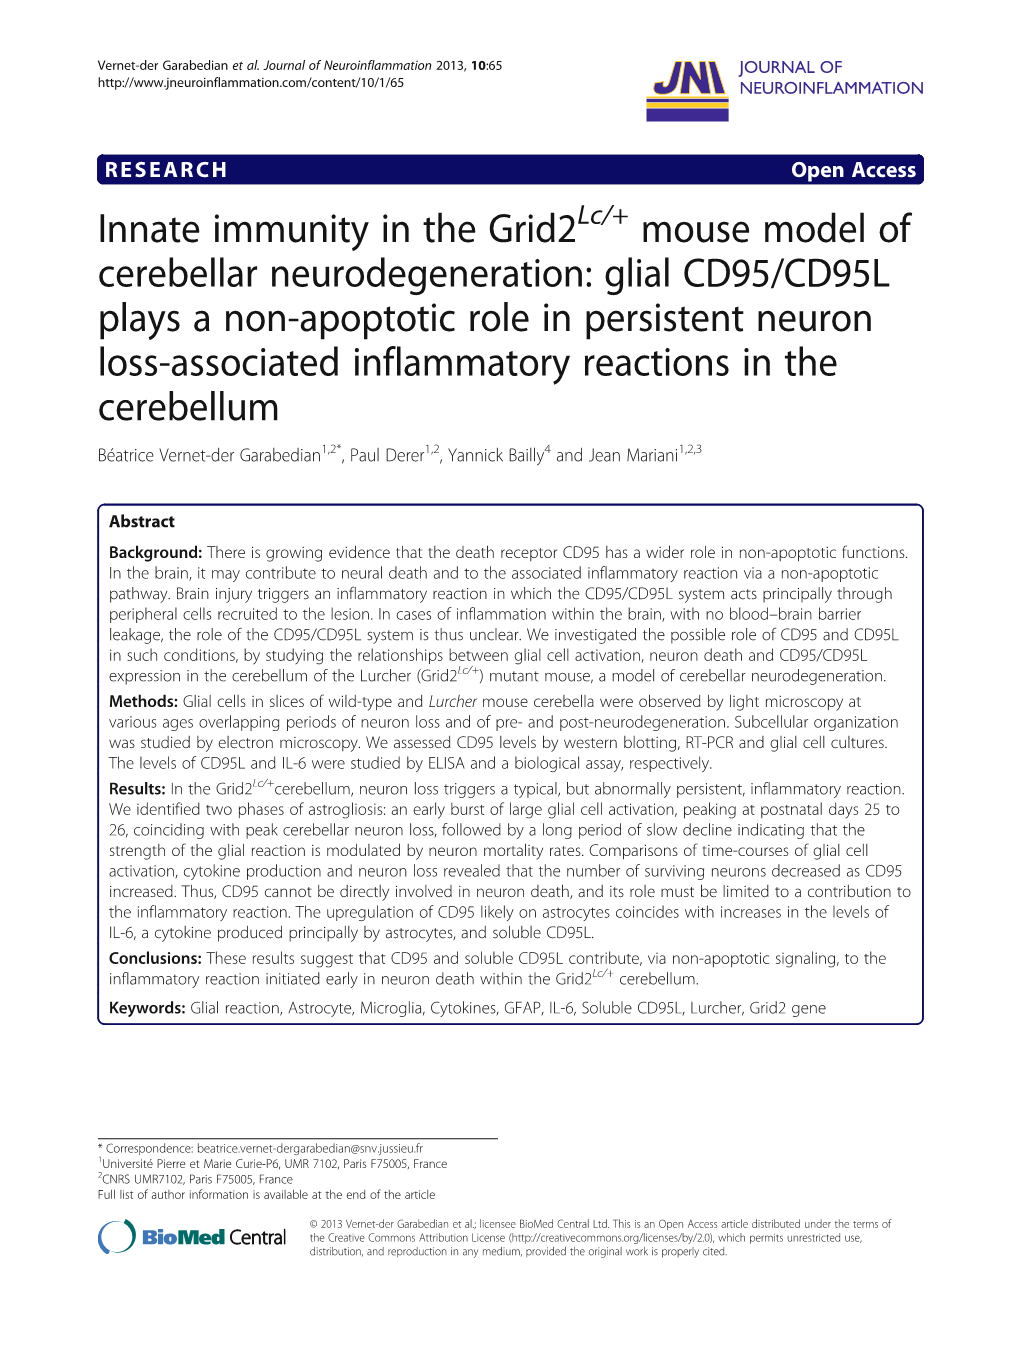 Innate Immunity in the Grid2 Mouse Model Of